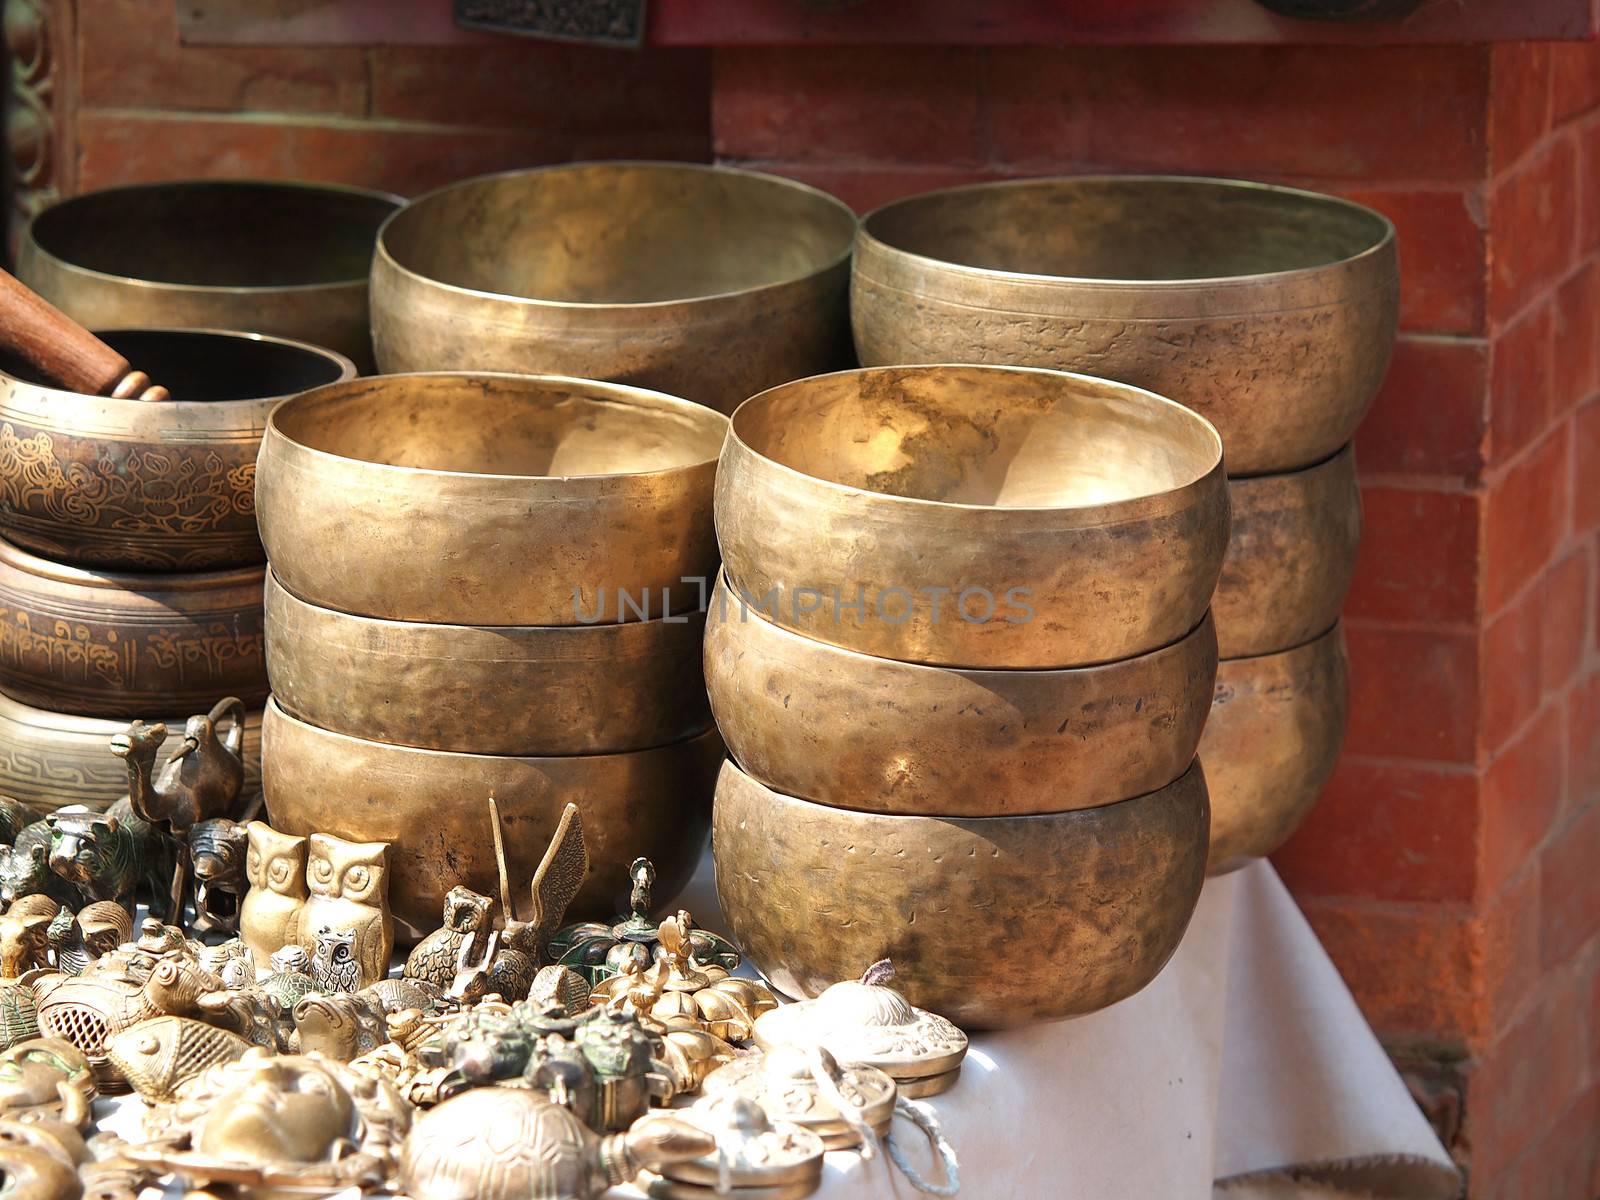 Singing Bowls (Cup of life) - popular mass product souvenier in Nepal, Tibet and India      